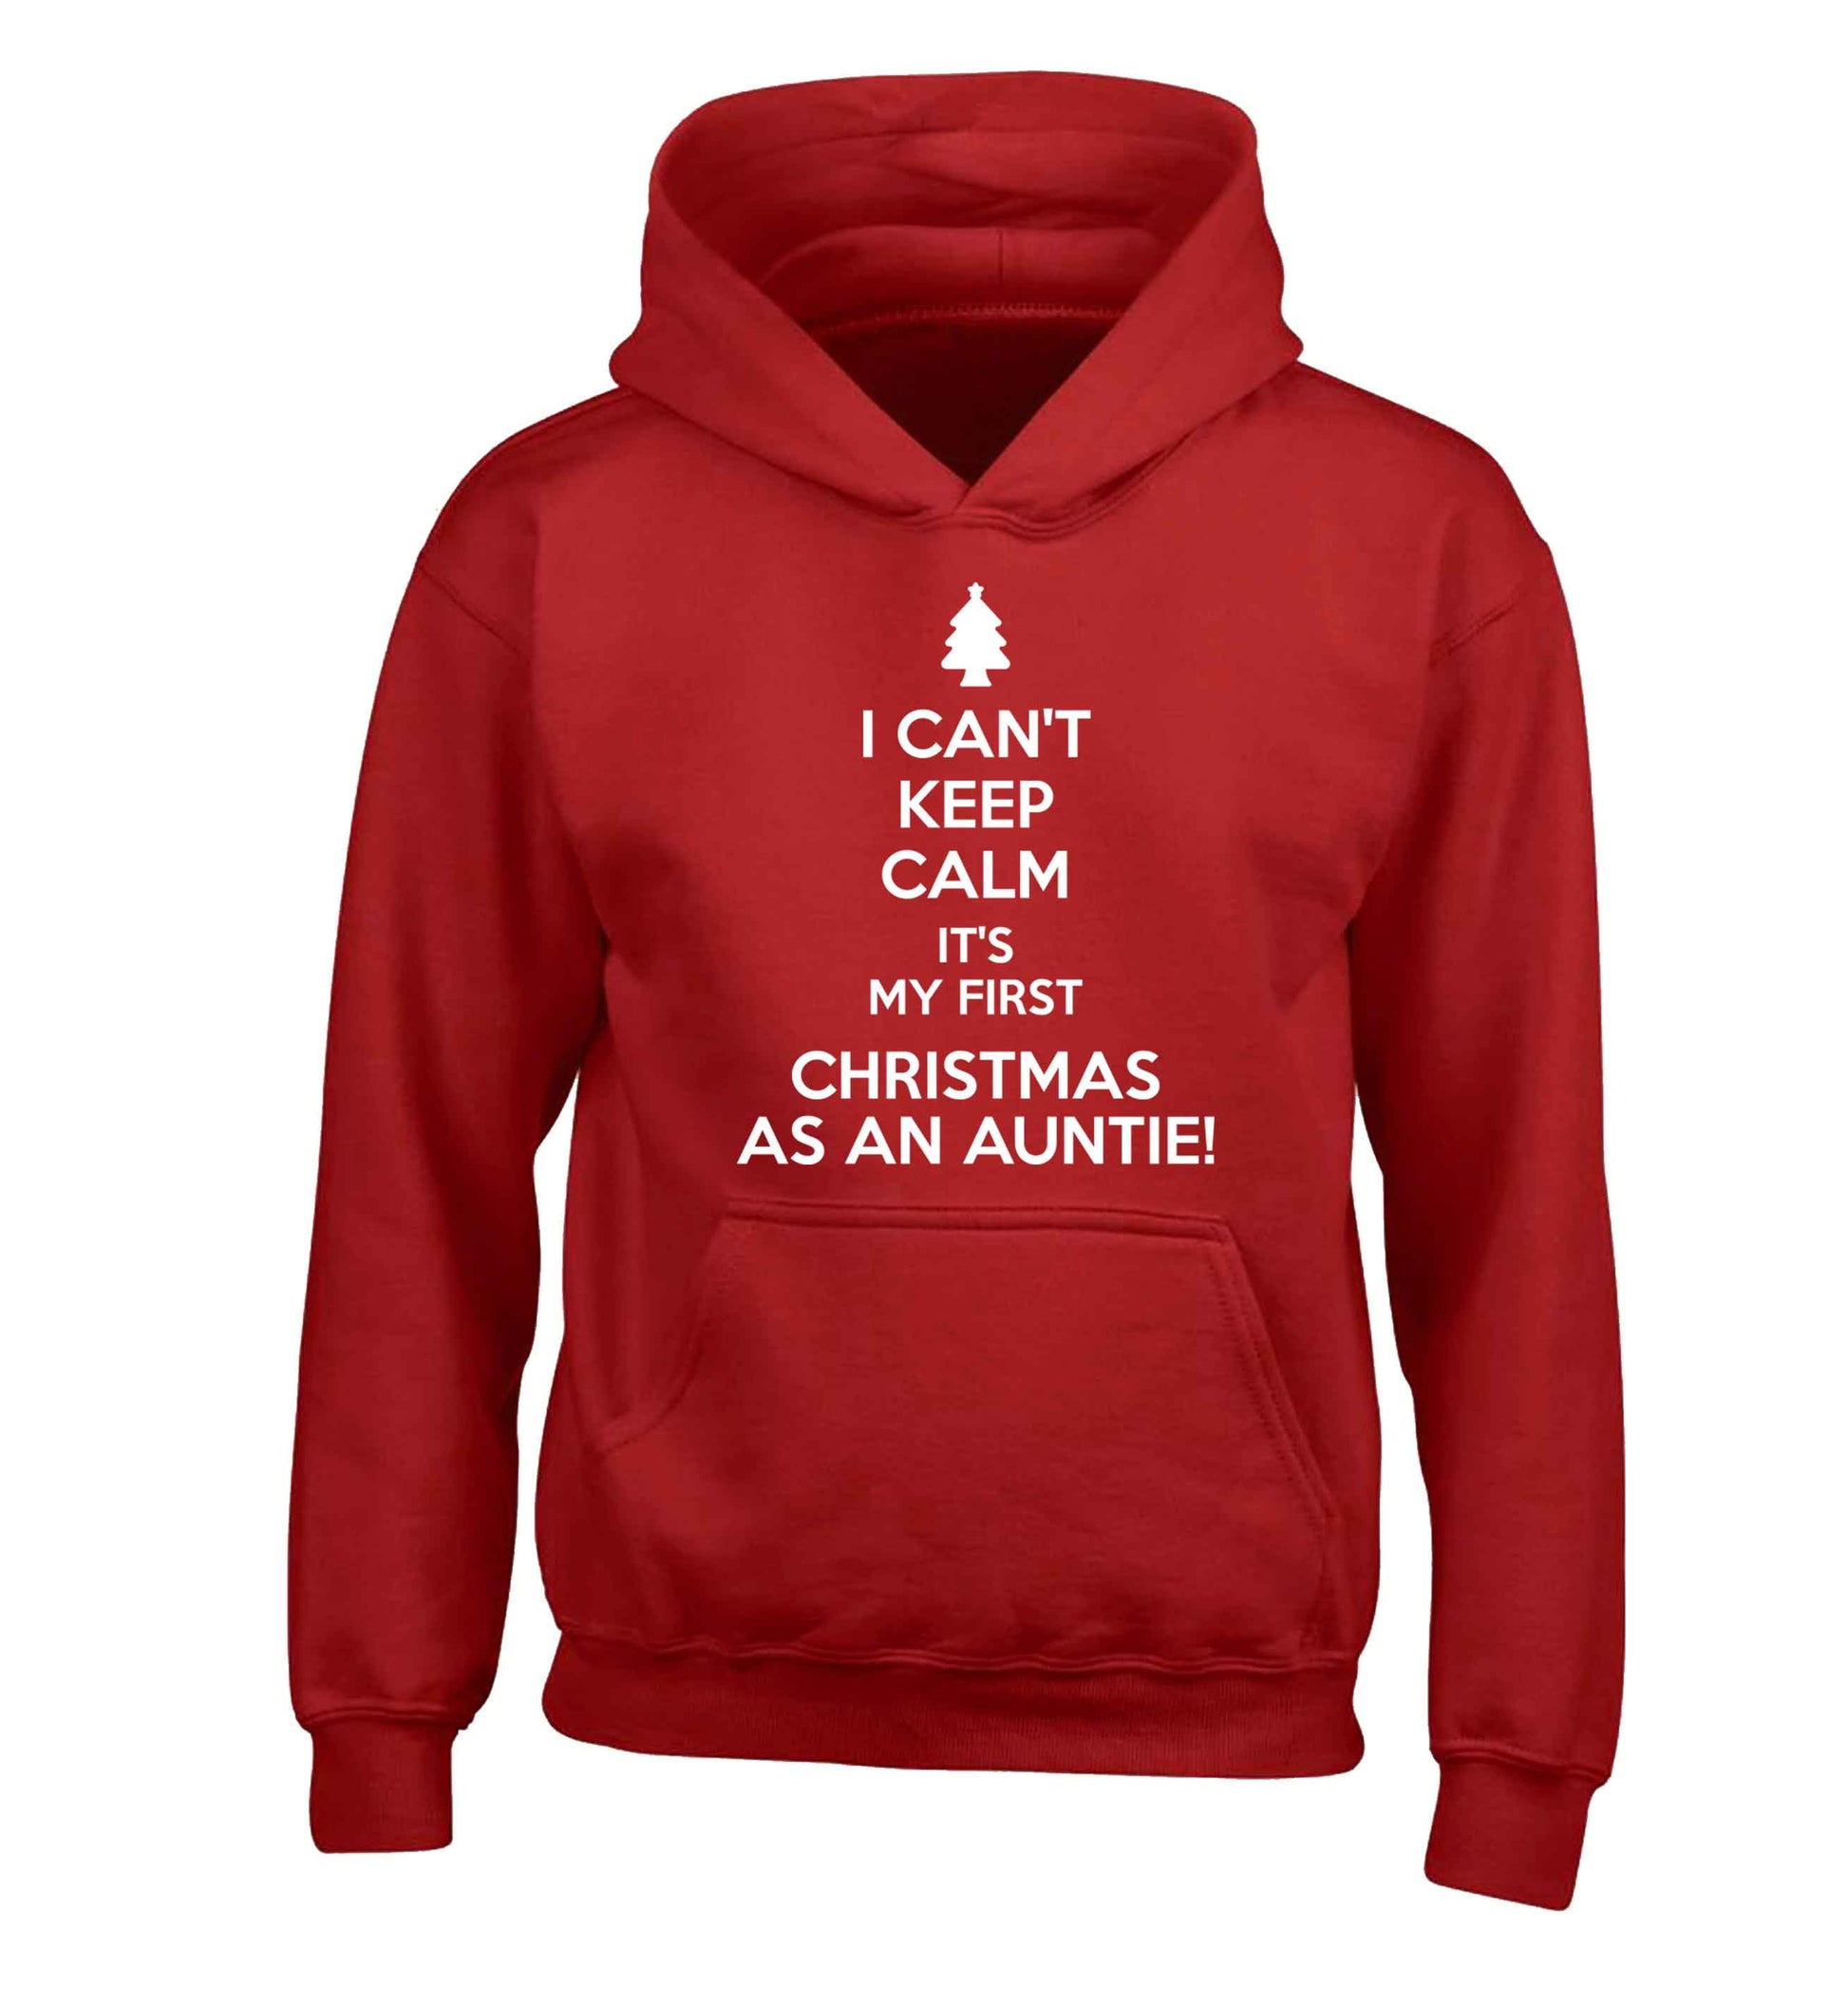 I can't keep calm it's my first Christmas as an auntie! children's red hoodie 12-13 Years